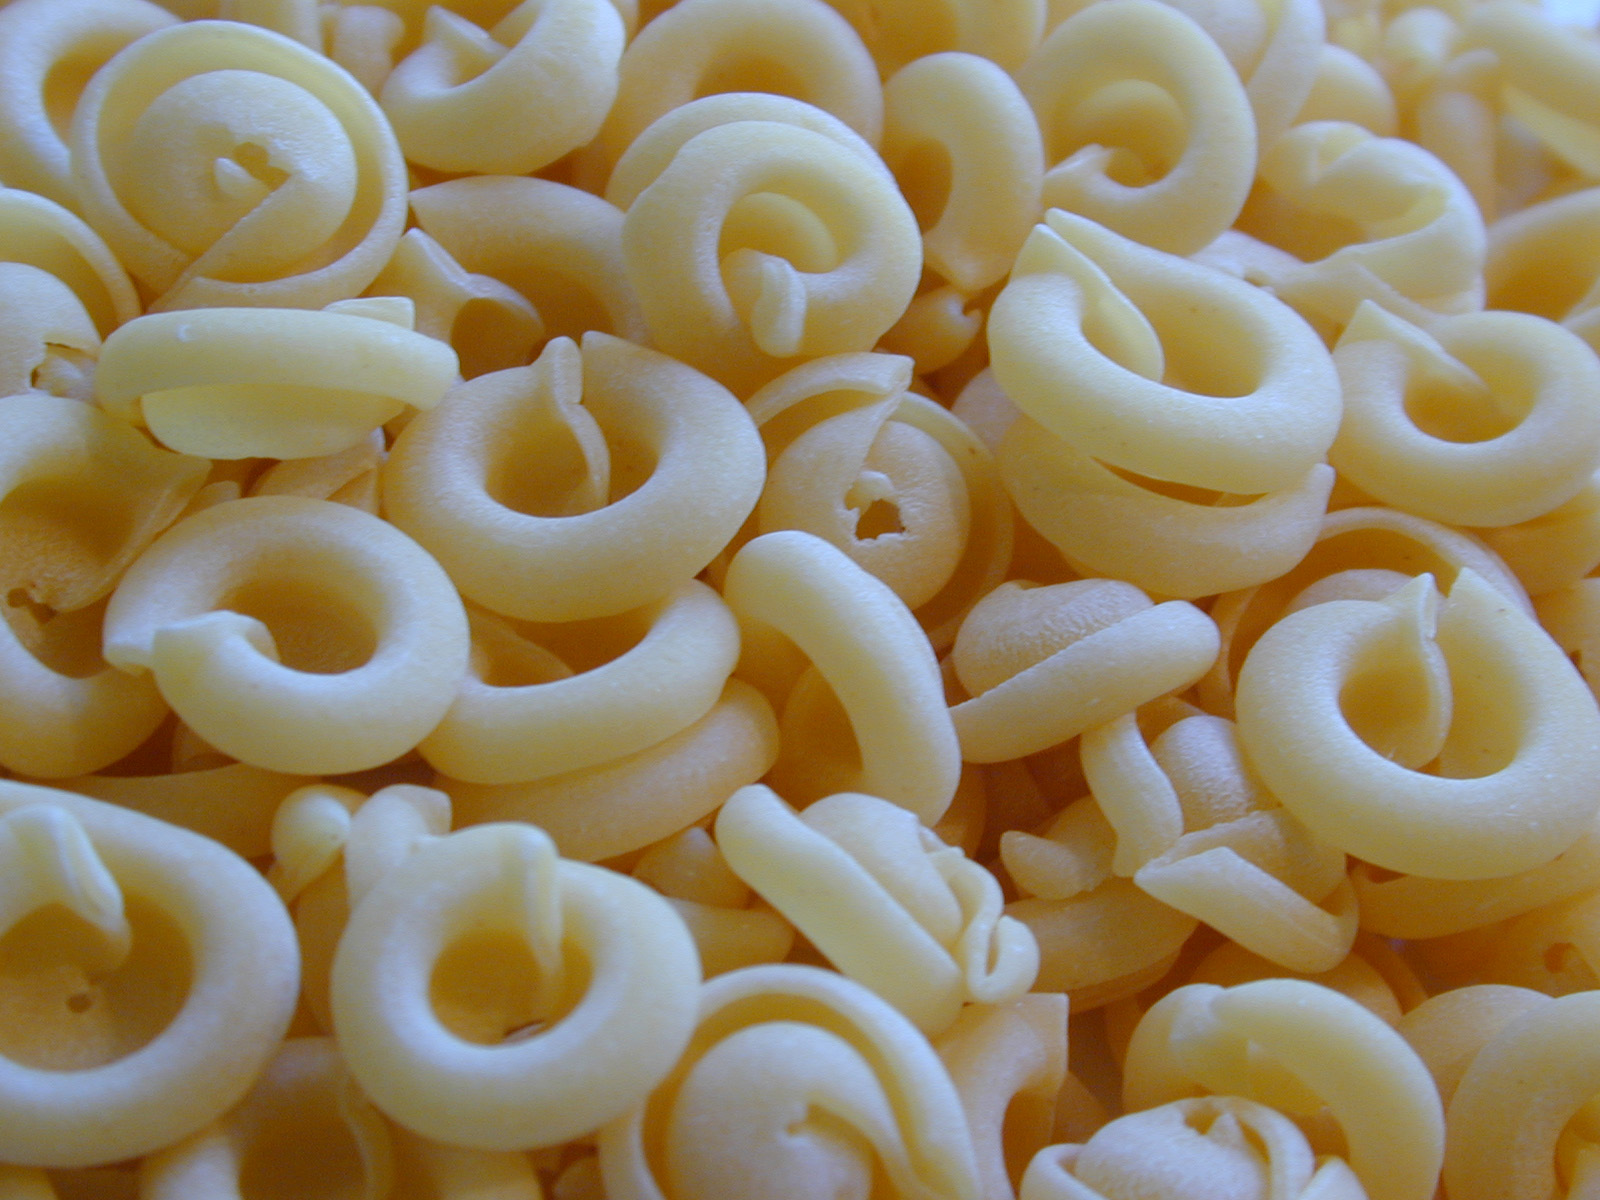 Free image of Background of dried uncooked Italian pasta